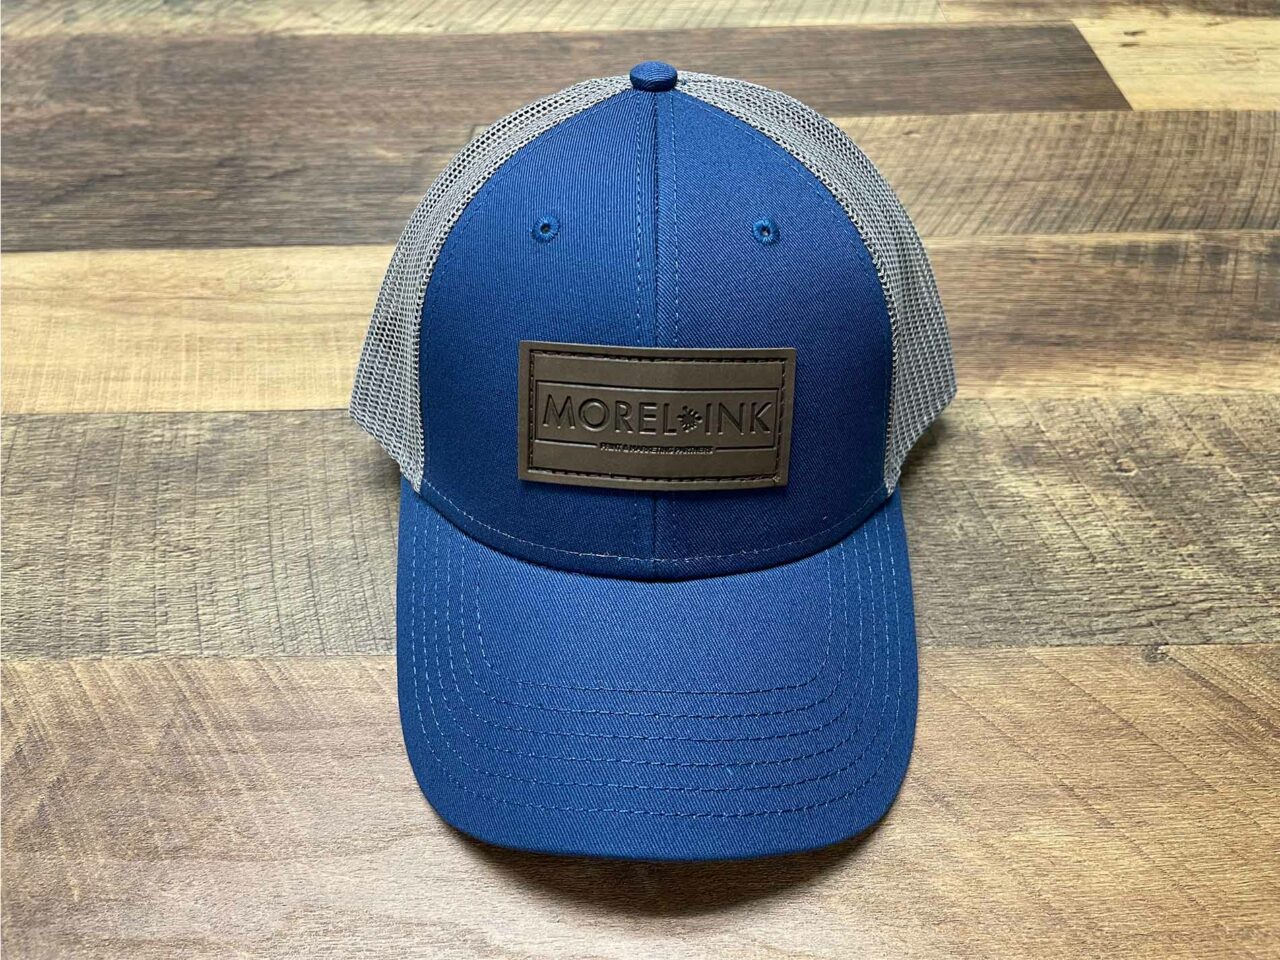 Example of Morel's apparel capabilities, showing a custom branded hat